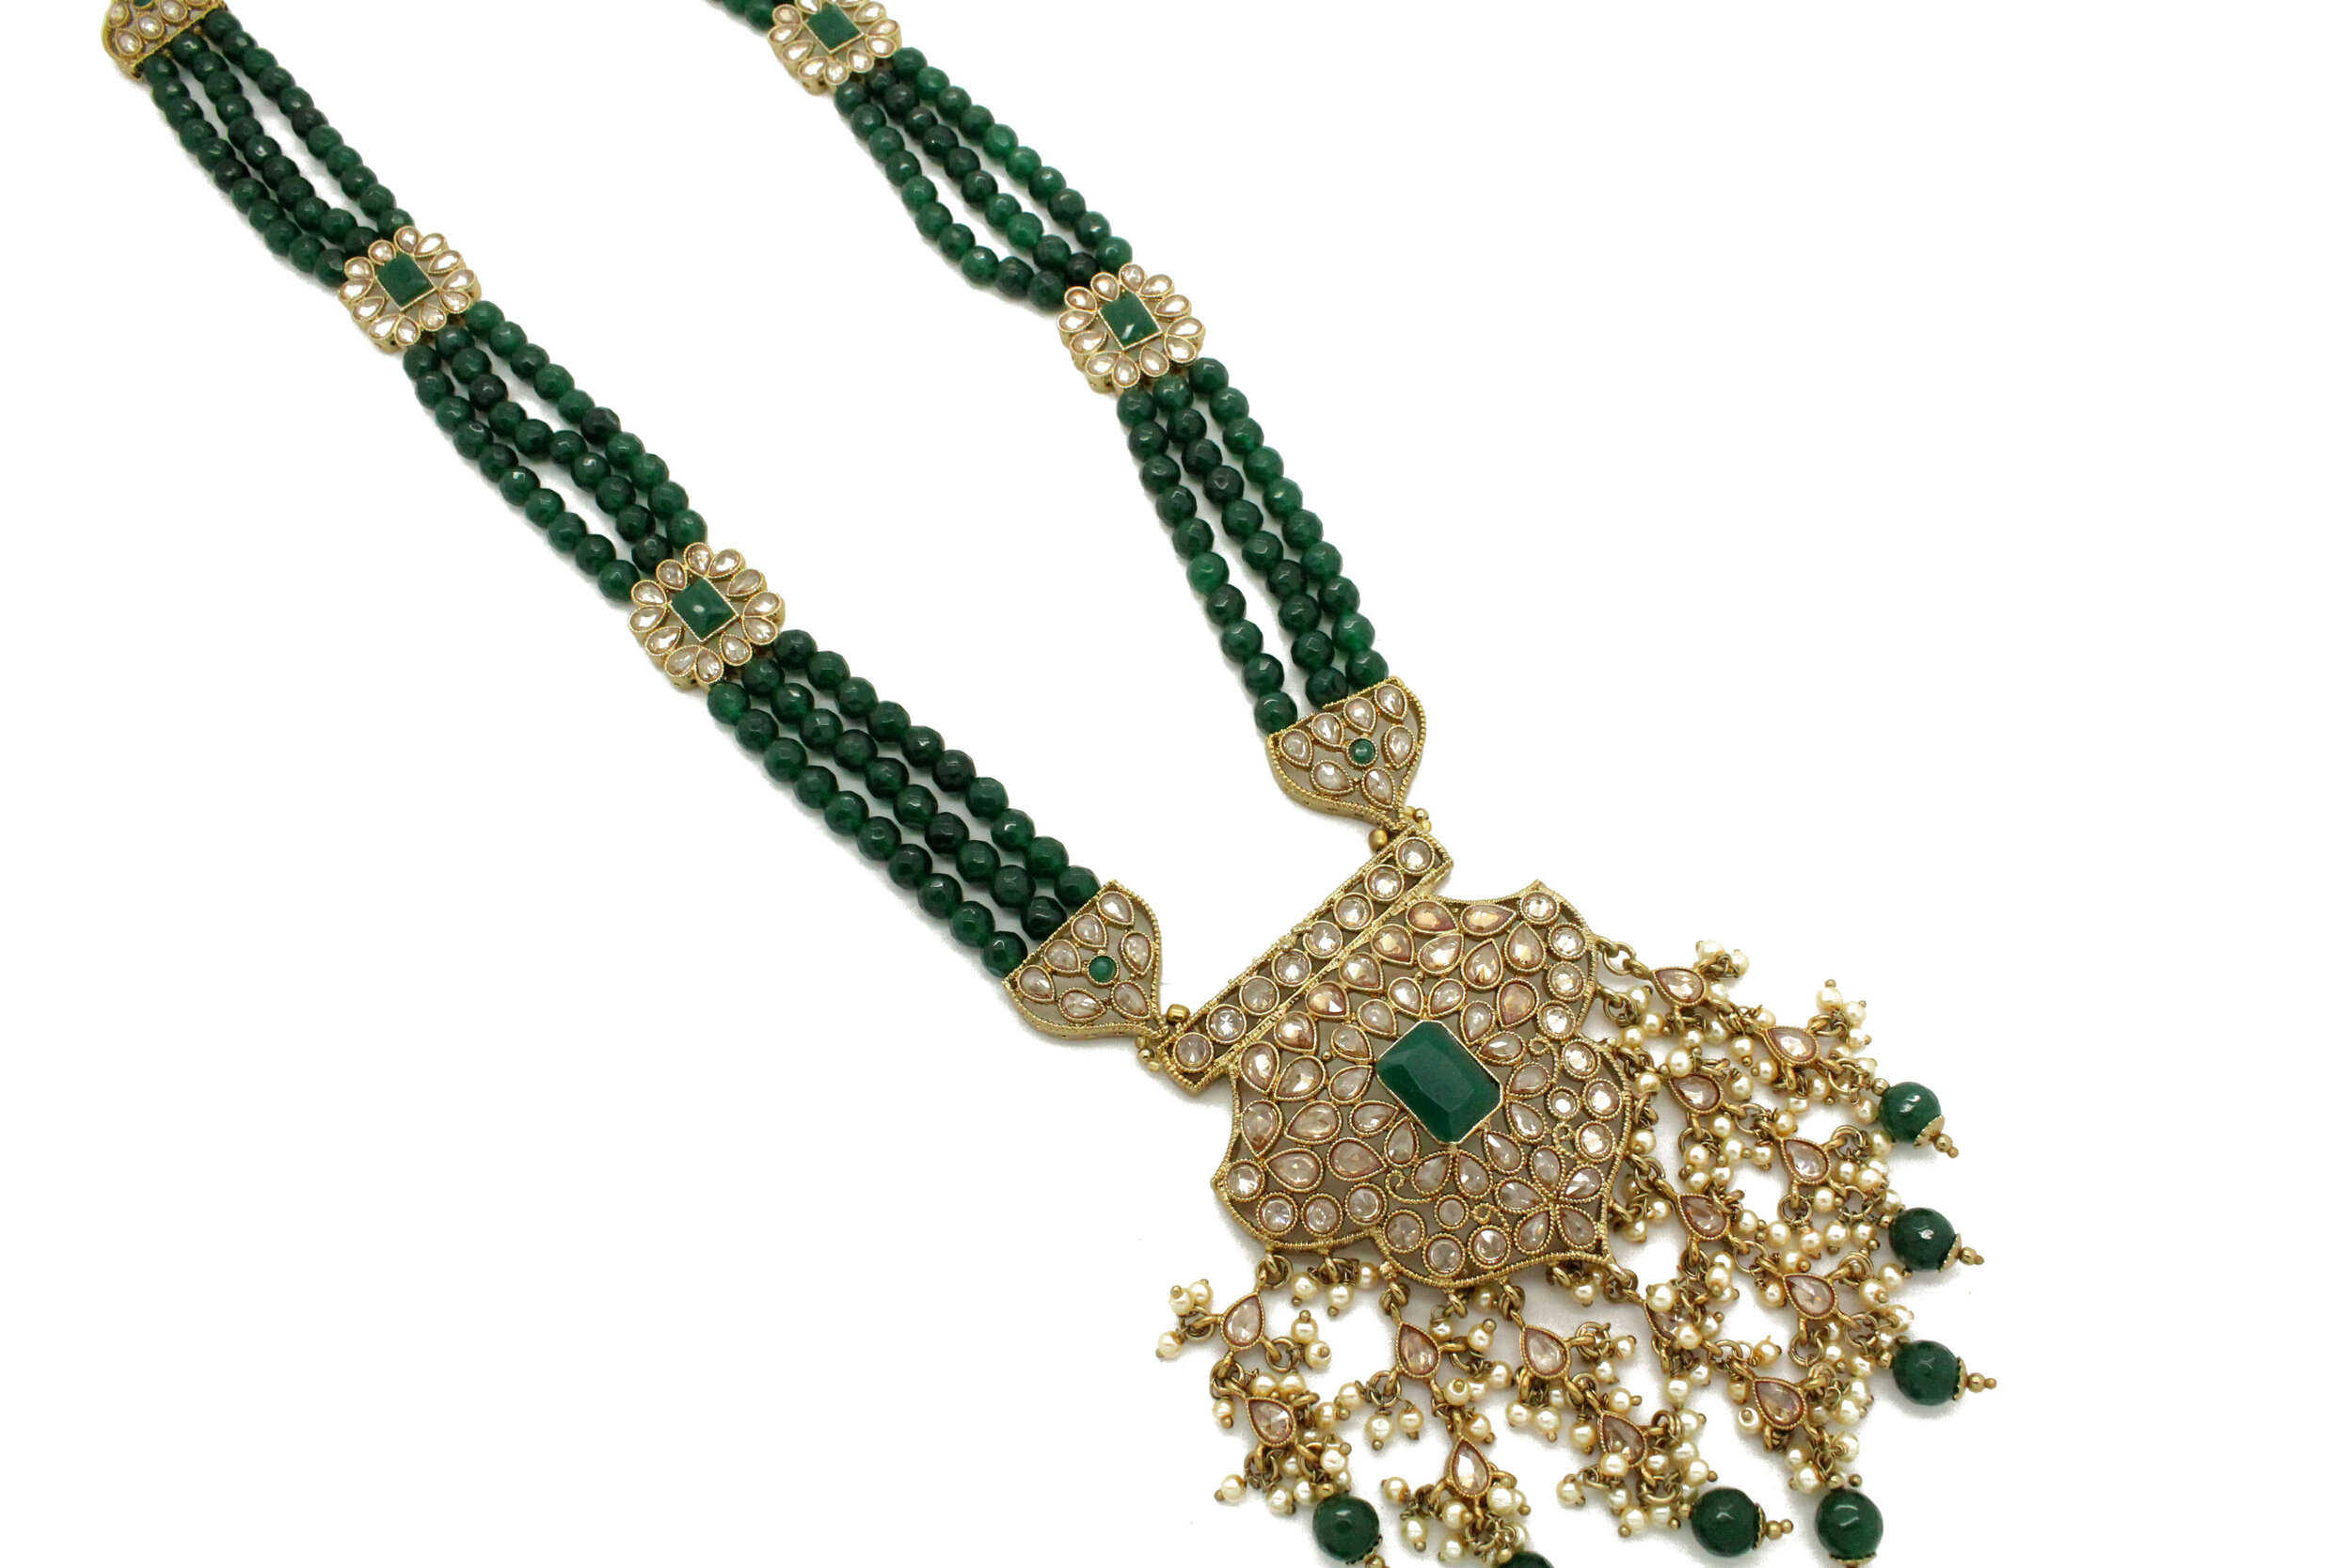 Indian Asian Bollywood Bridal Antique Gold Green Mala Necklace